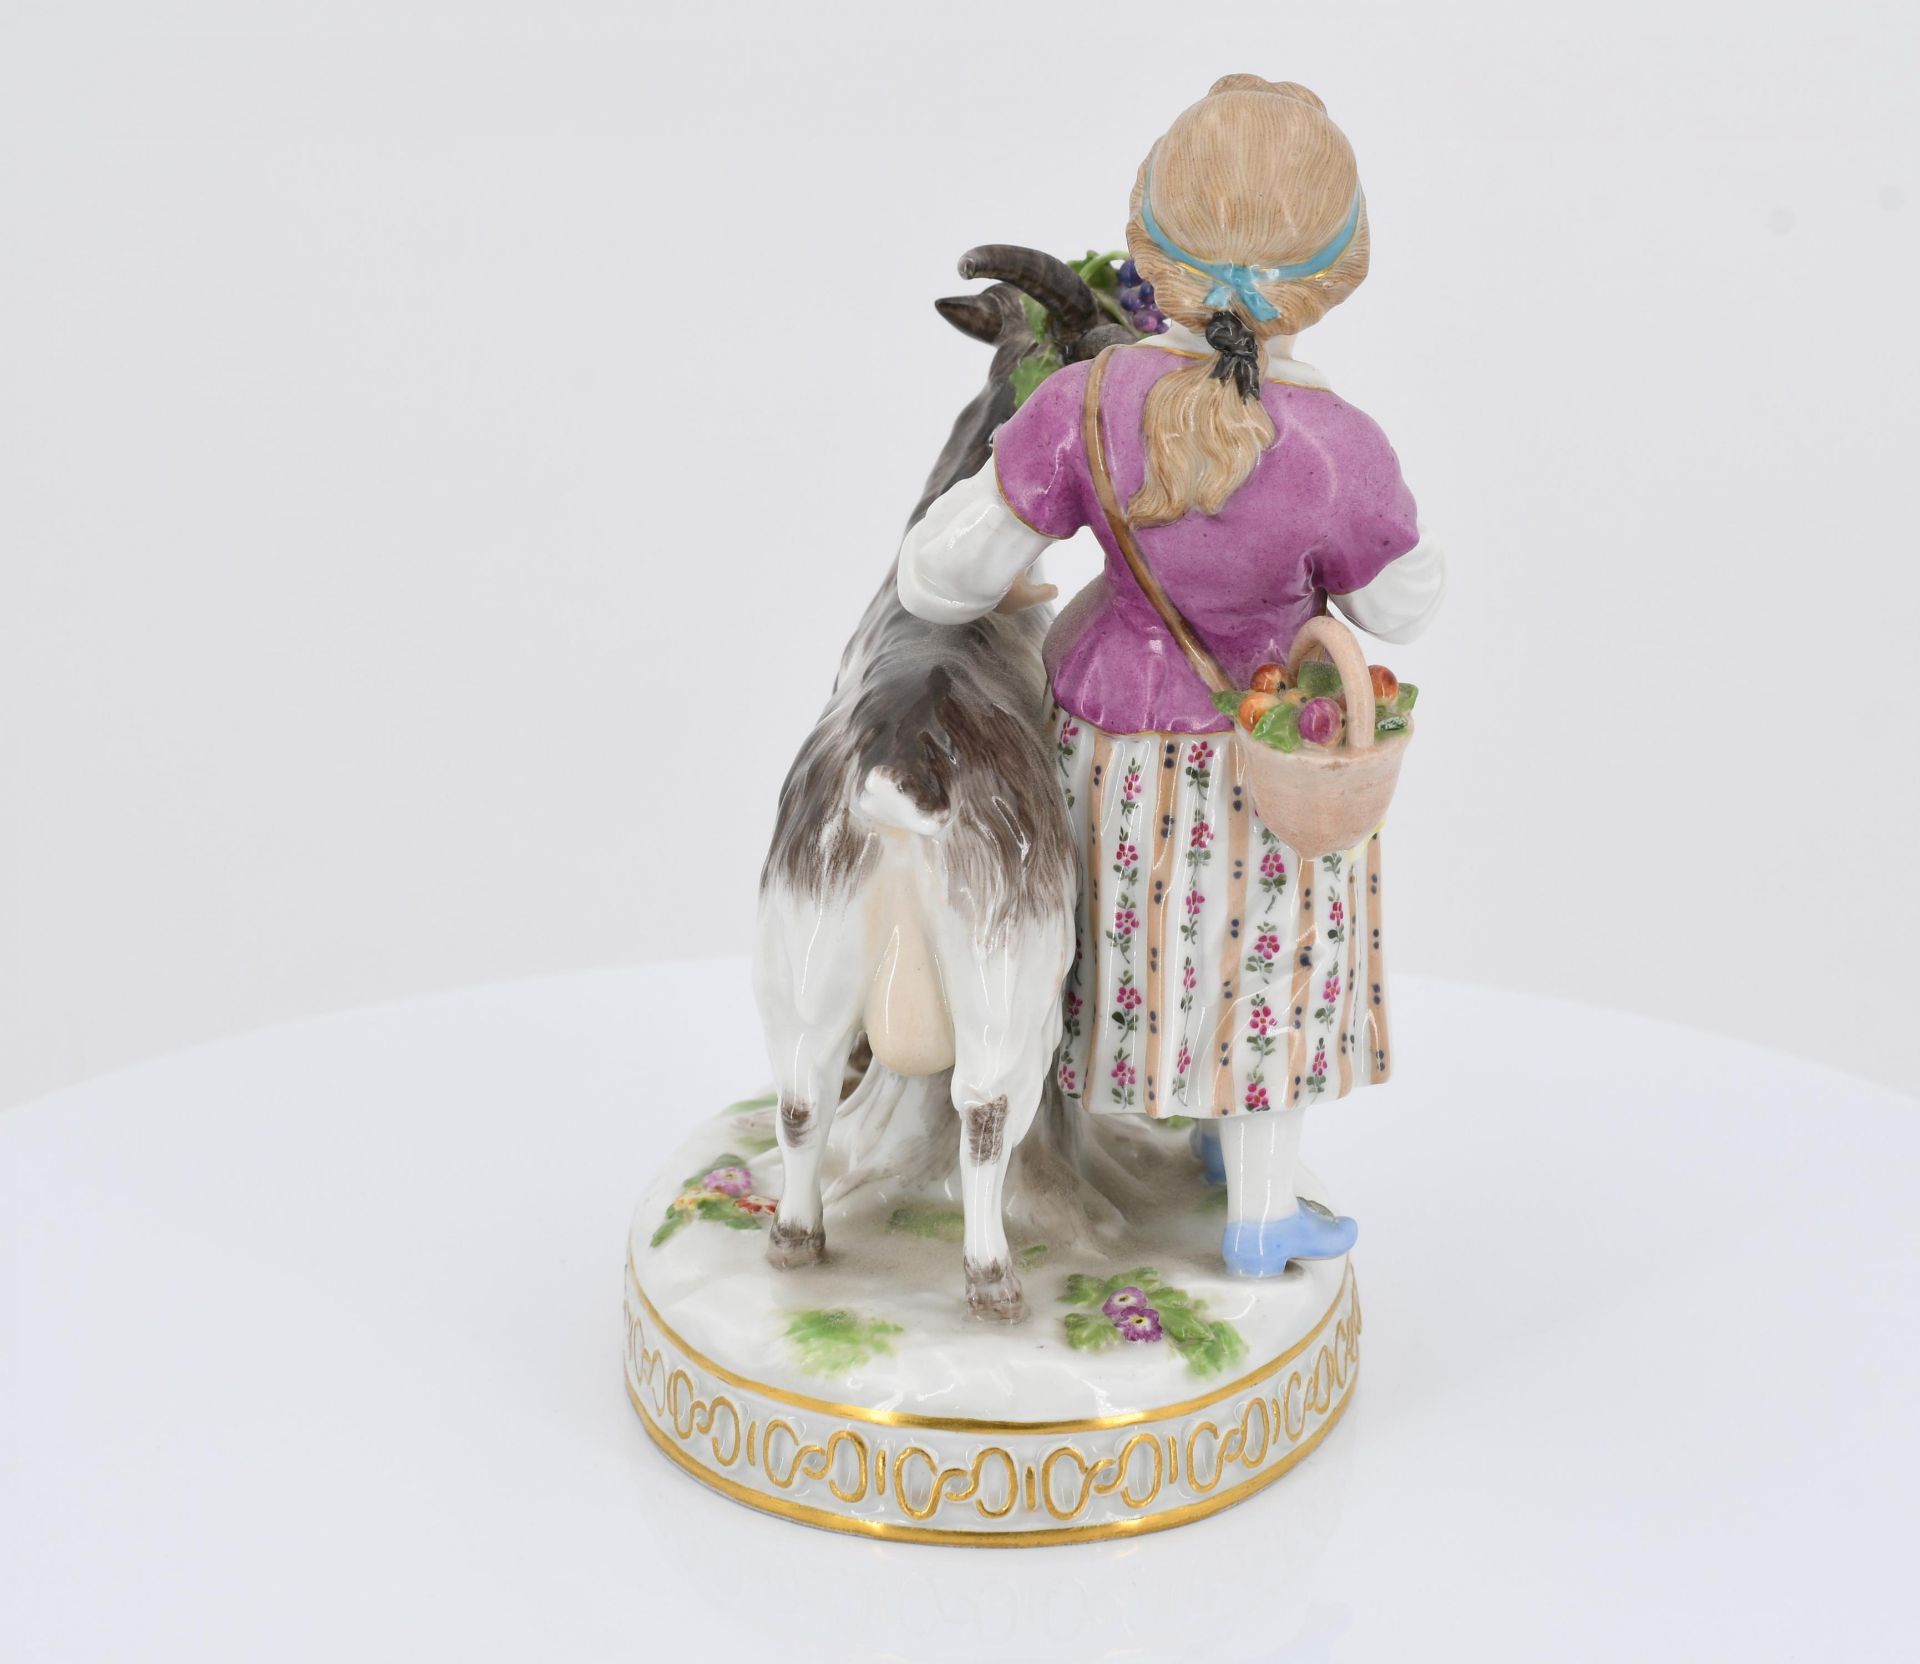 Girl with billy goat and girl with sheep - Image 10 of 11